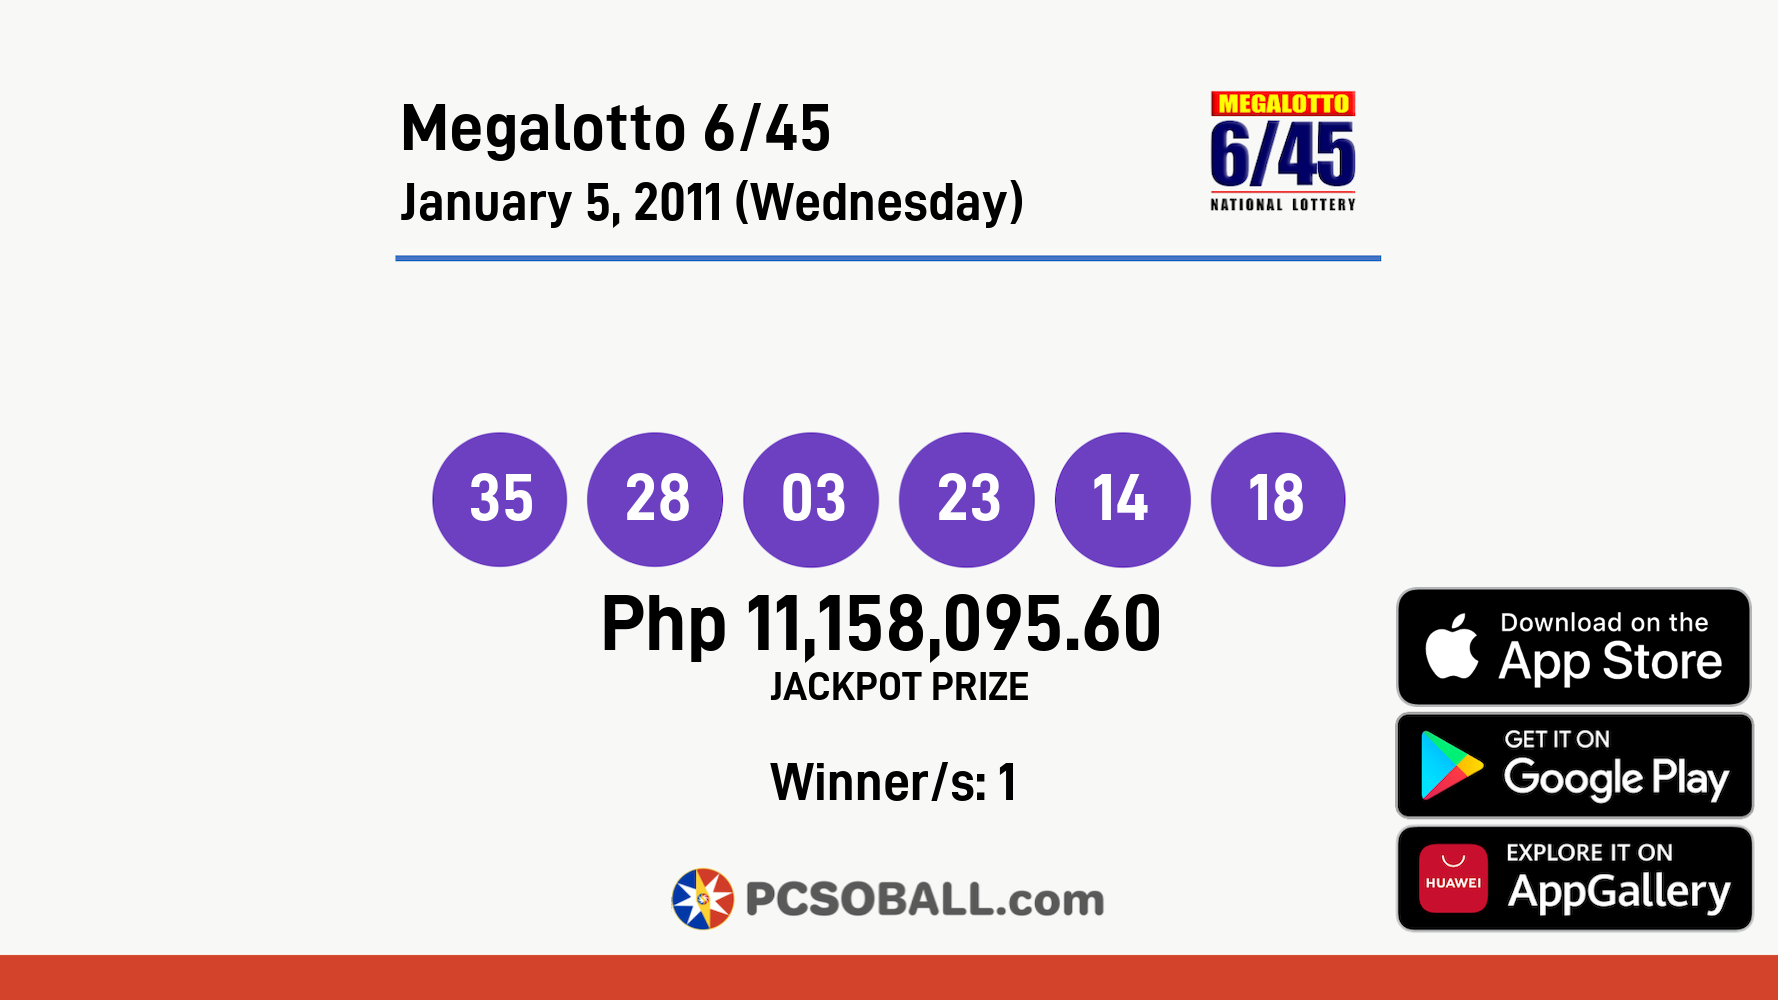 Megalotto 6/45 January 5, 2011 (Wednesday) Result